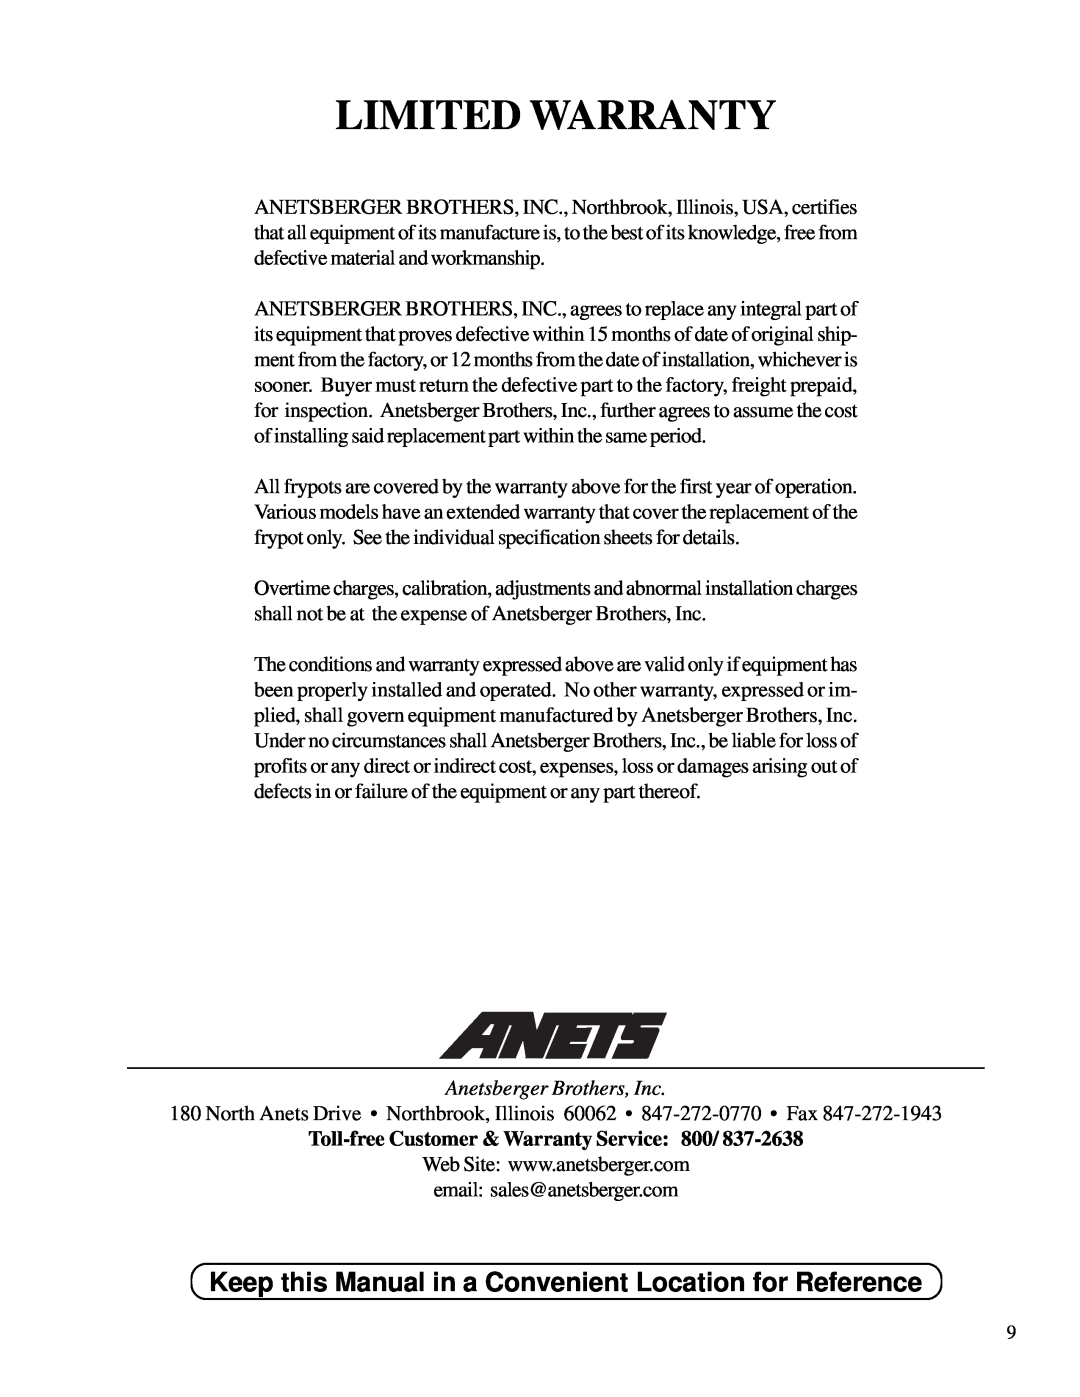 Anetsberger Brothers FM-14 warranty Limited Warranty, Anetsberger Brothers, Inc, Toll-freeCustomer & Warranty Service 